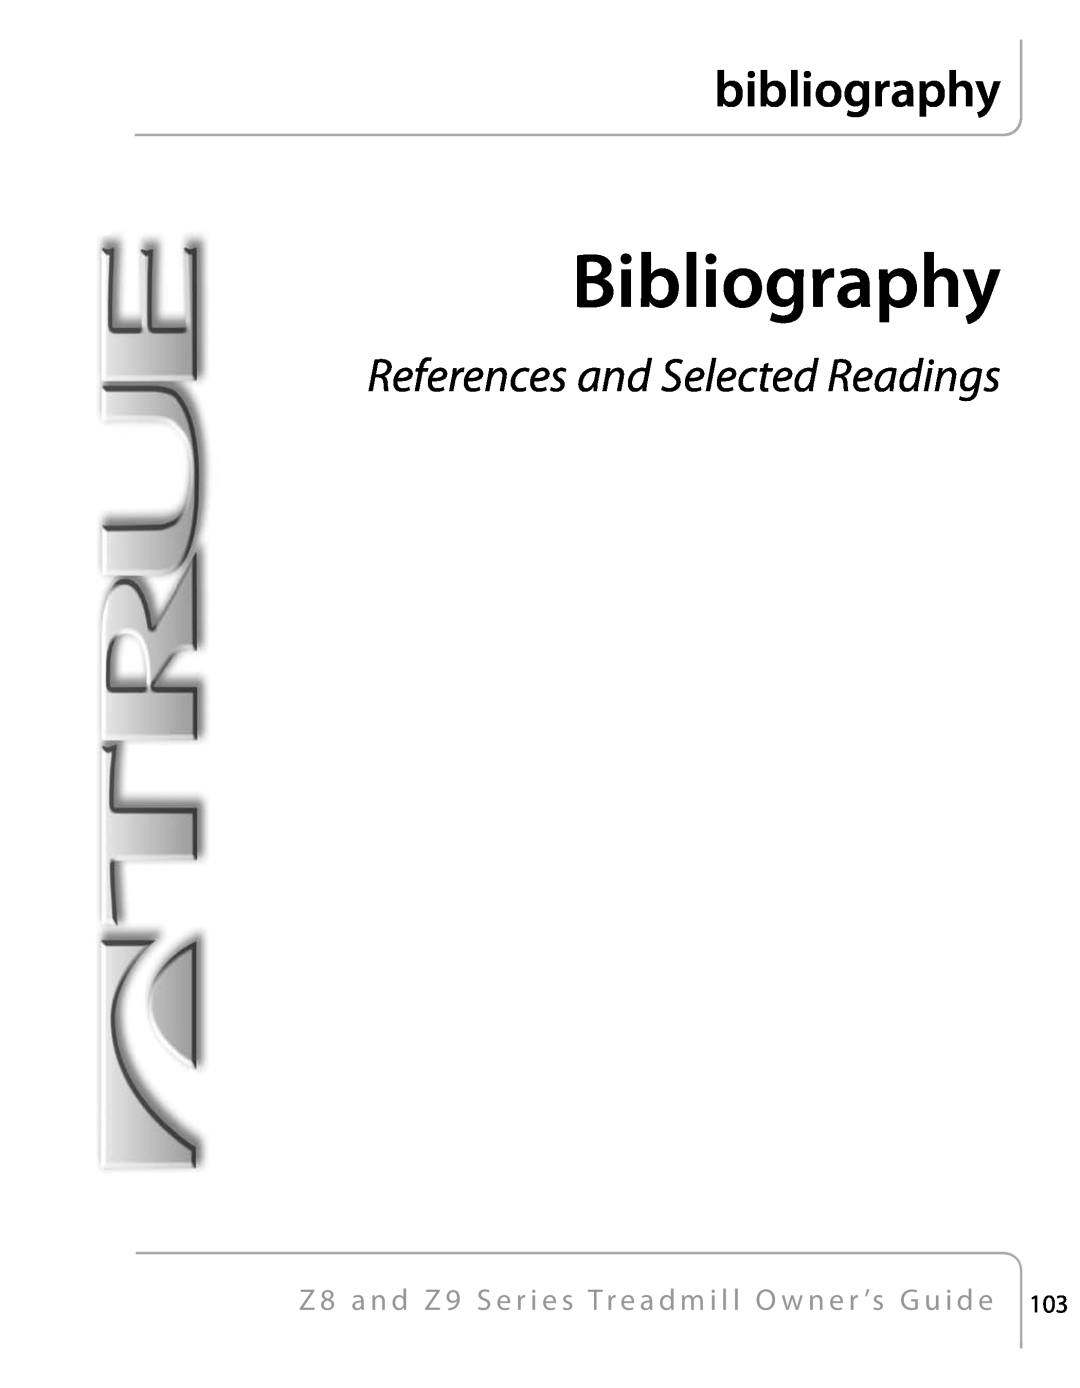 True Fitness Z9, Z8 manual Bibliography, bibliography, References and Selected Readings 